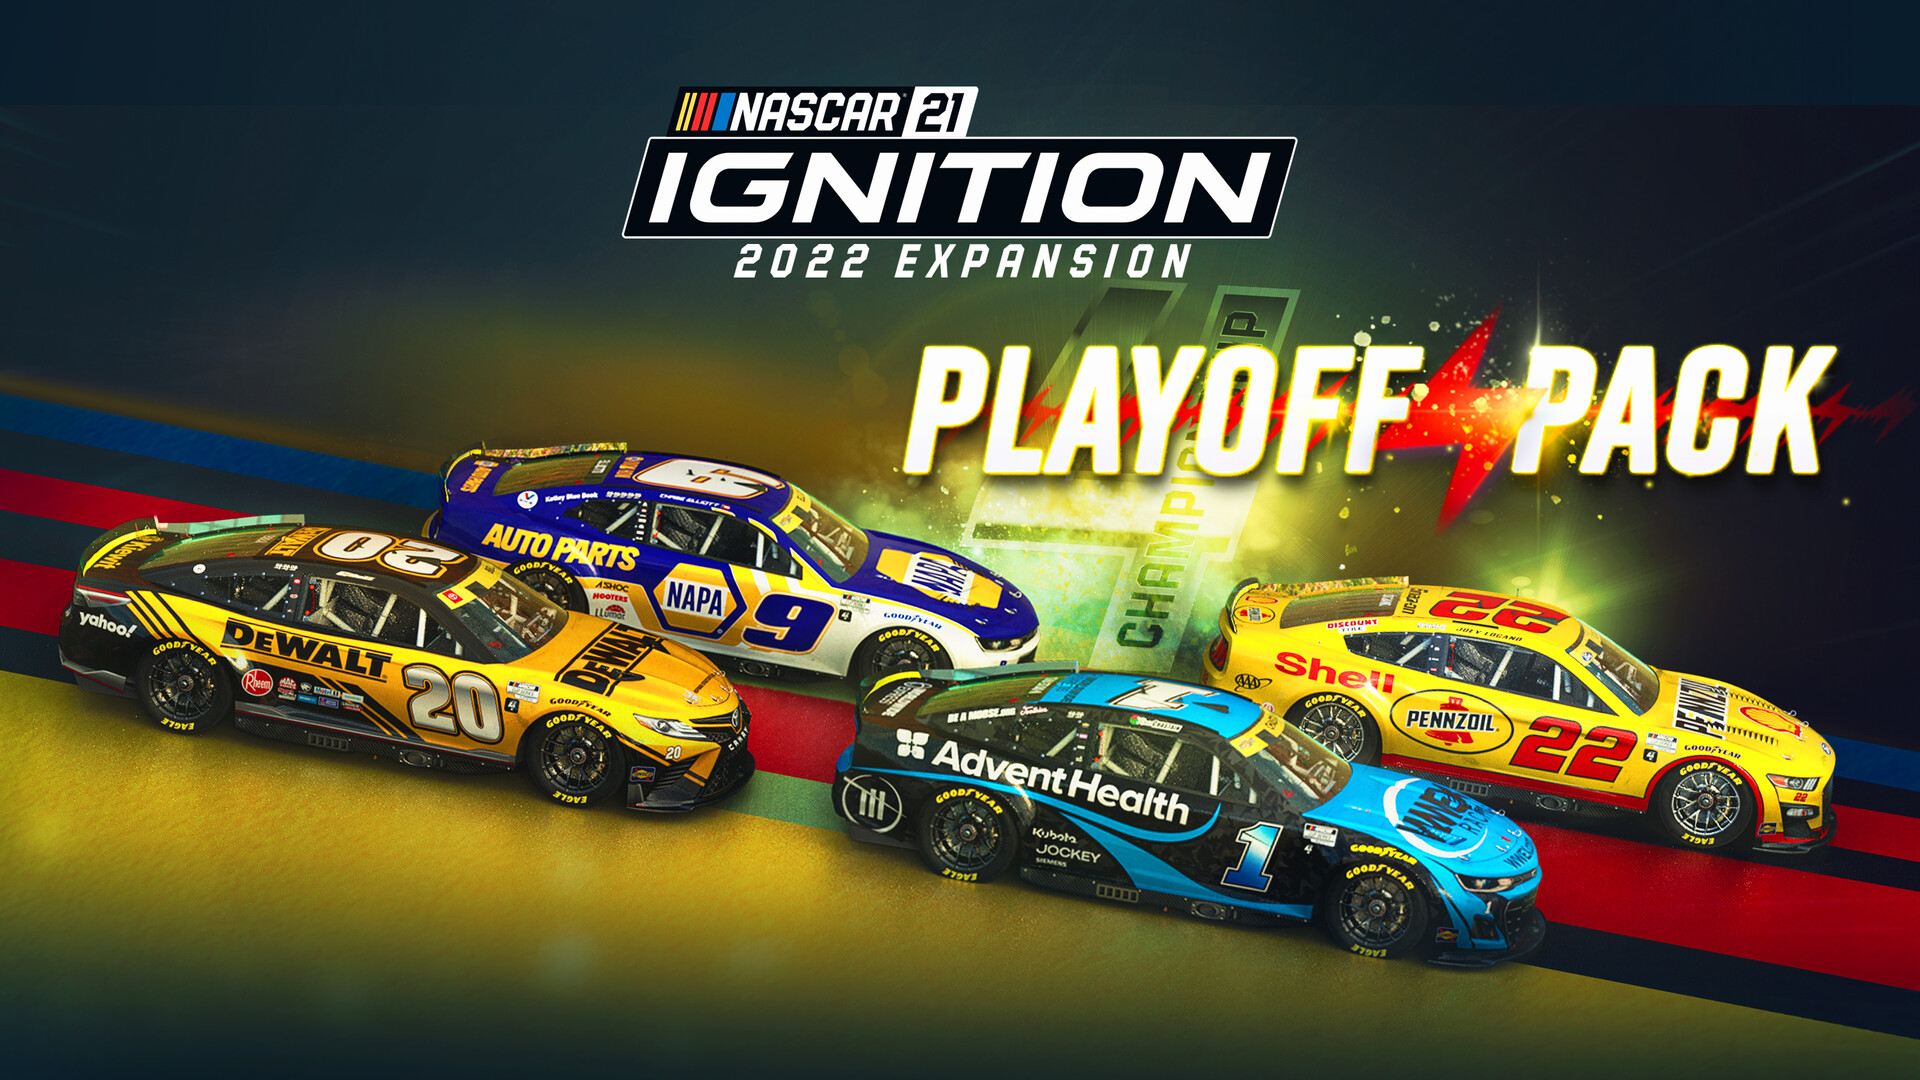 NASCAR 21: Ignition - 2022 Playoff Pack Featured Screenshot #1